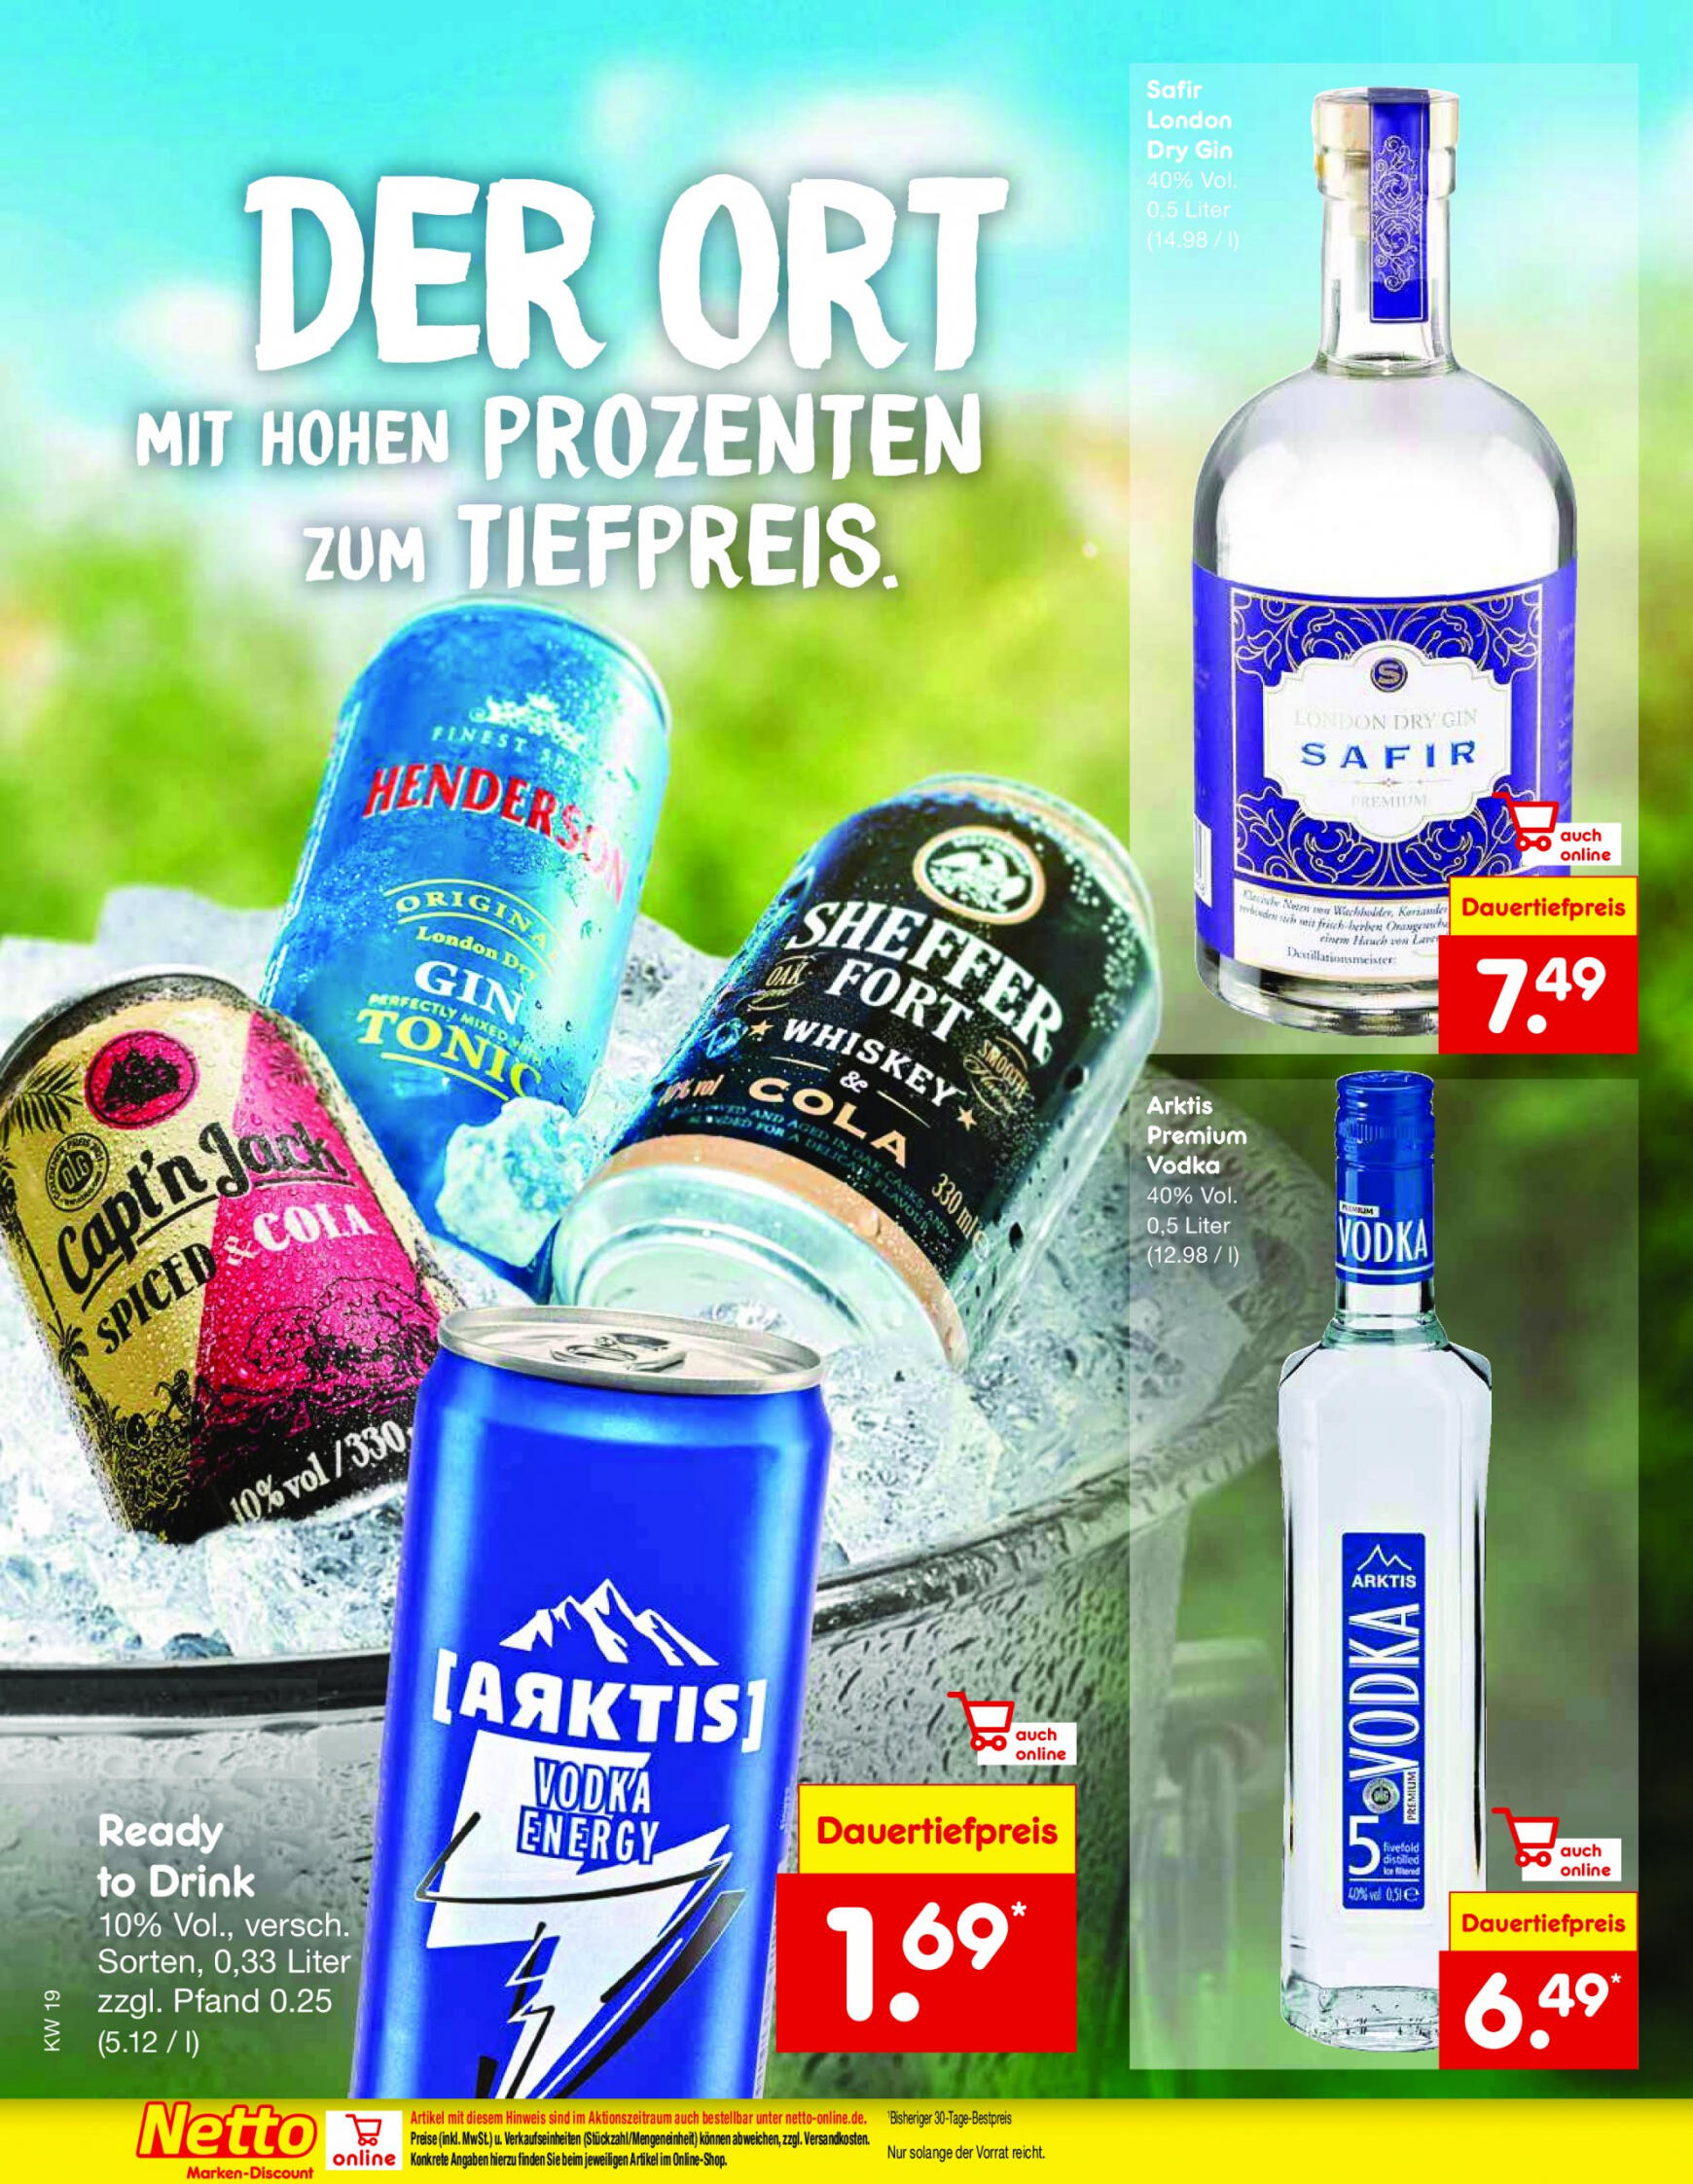 netto - Flyer Netto aktuell 06.05. - 11.05. - page: 22